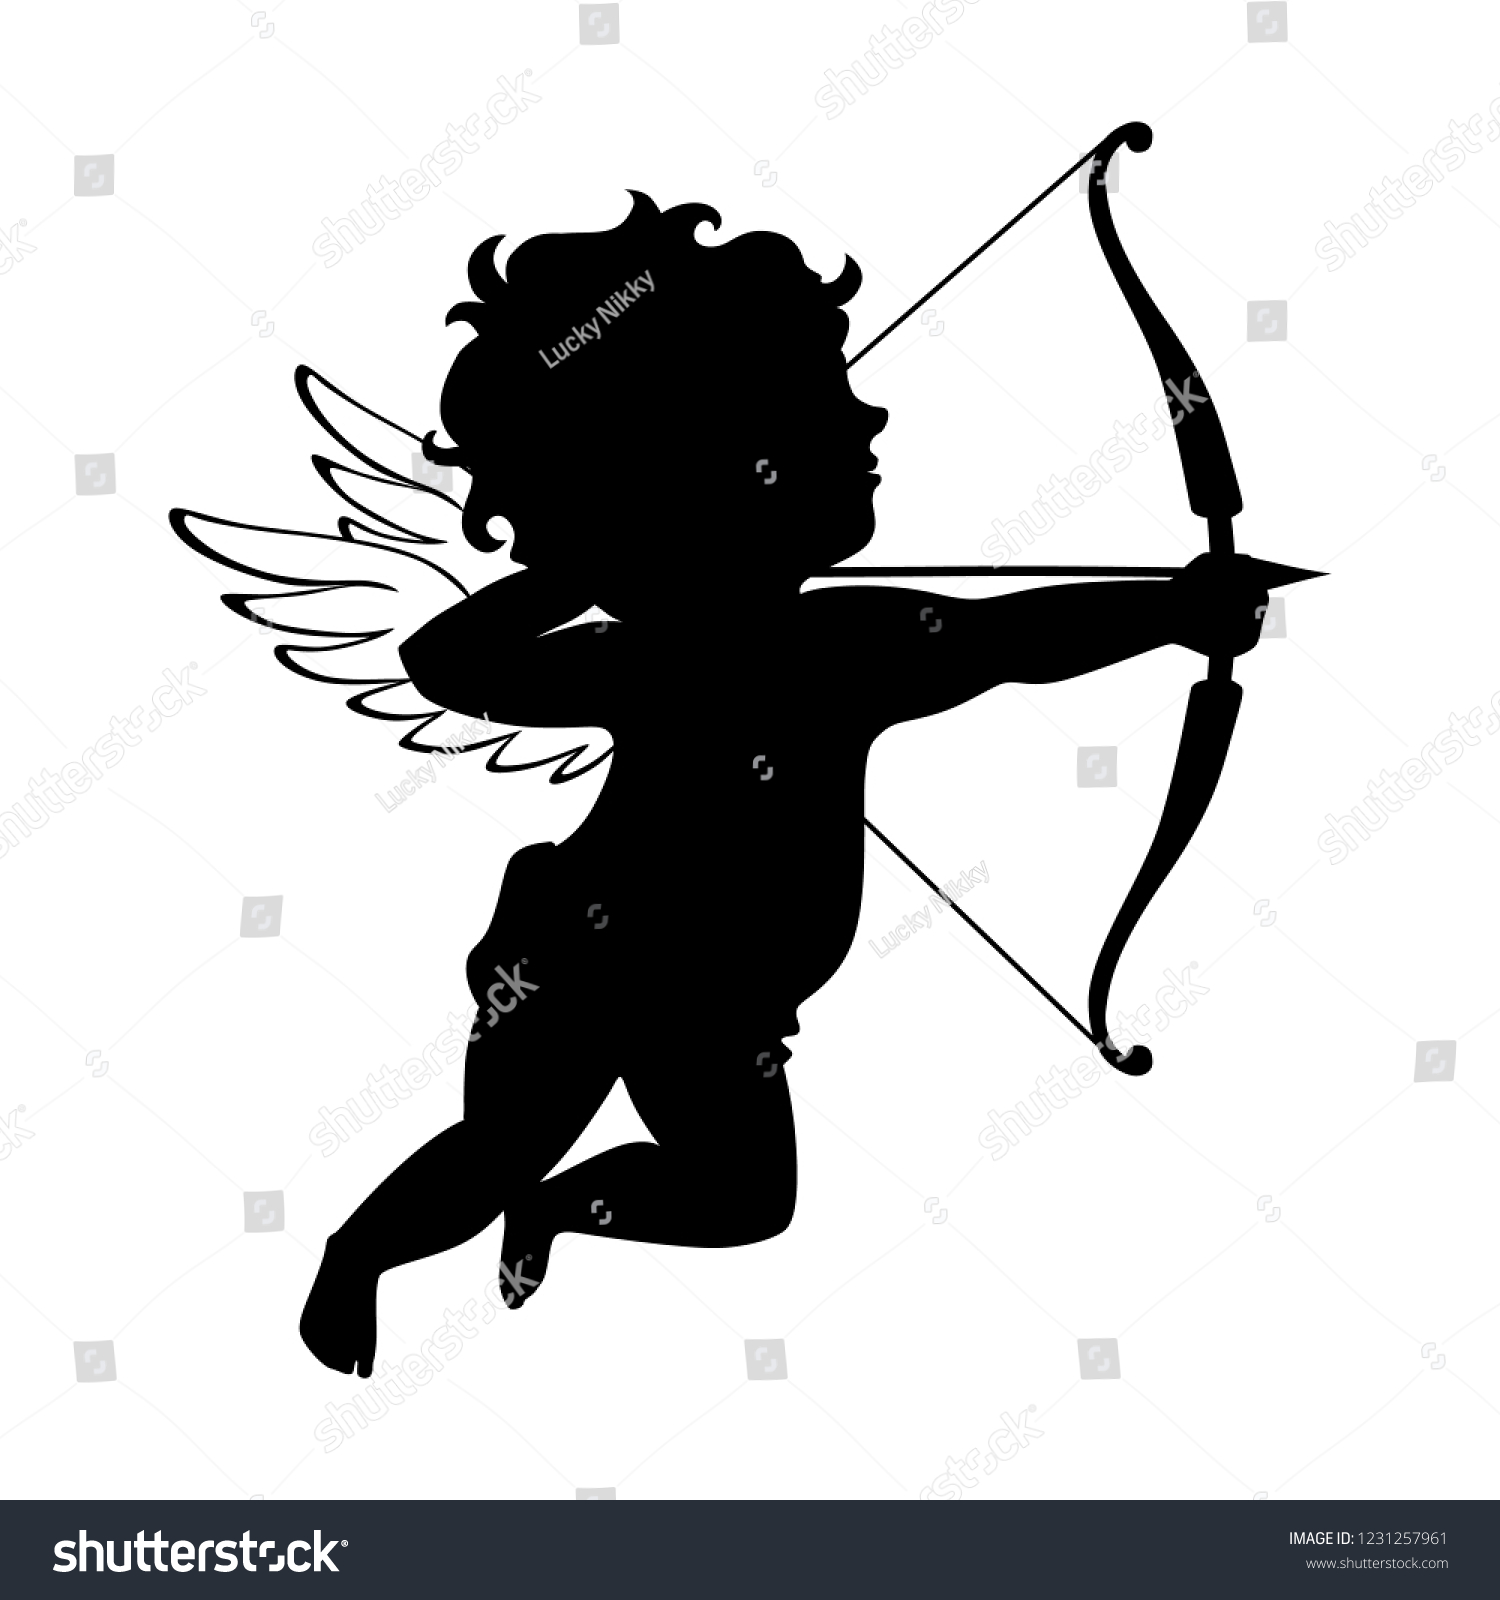 Cupid Black Silhouette Valentines Day Symbol Stock Vector Royalty Free 1231257961 Shutterstock 3444